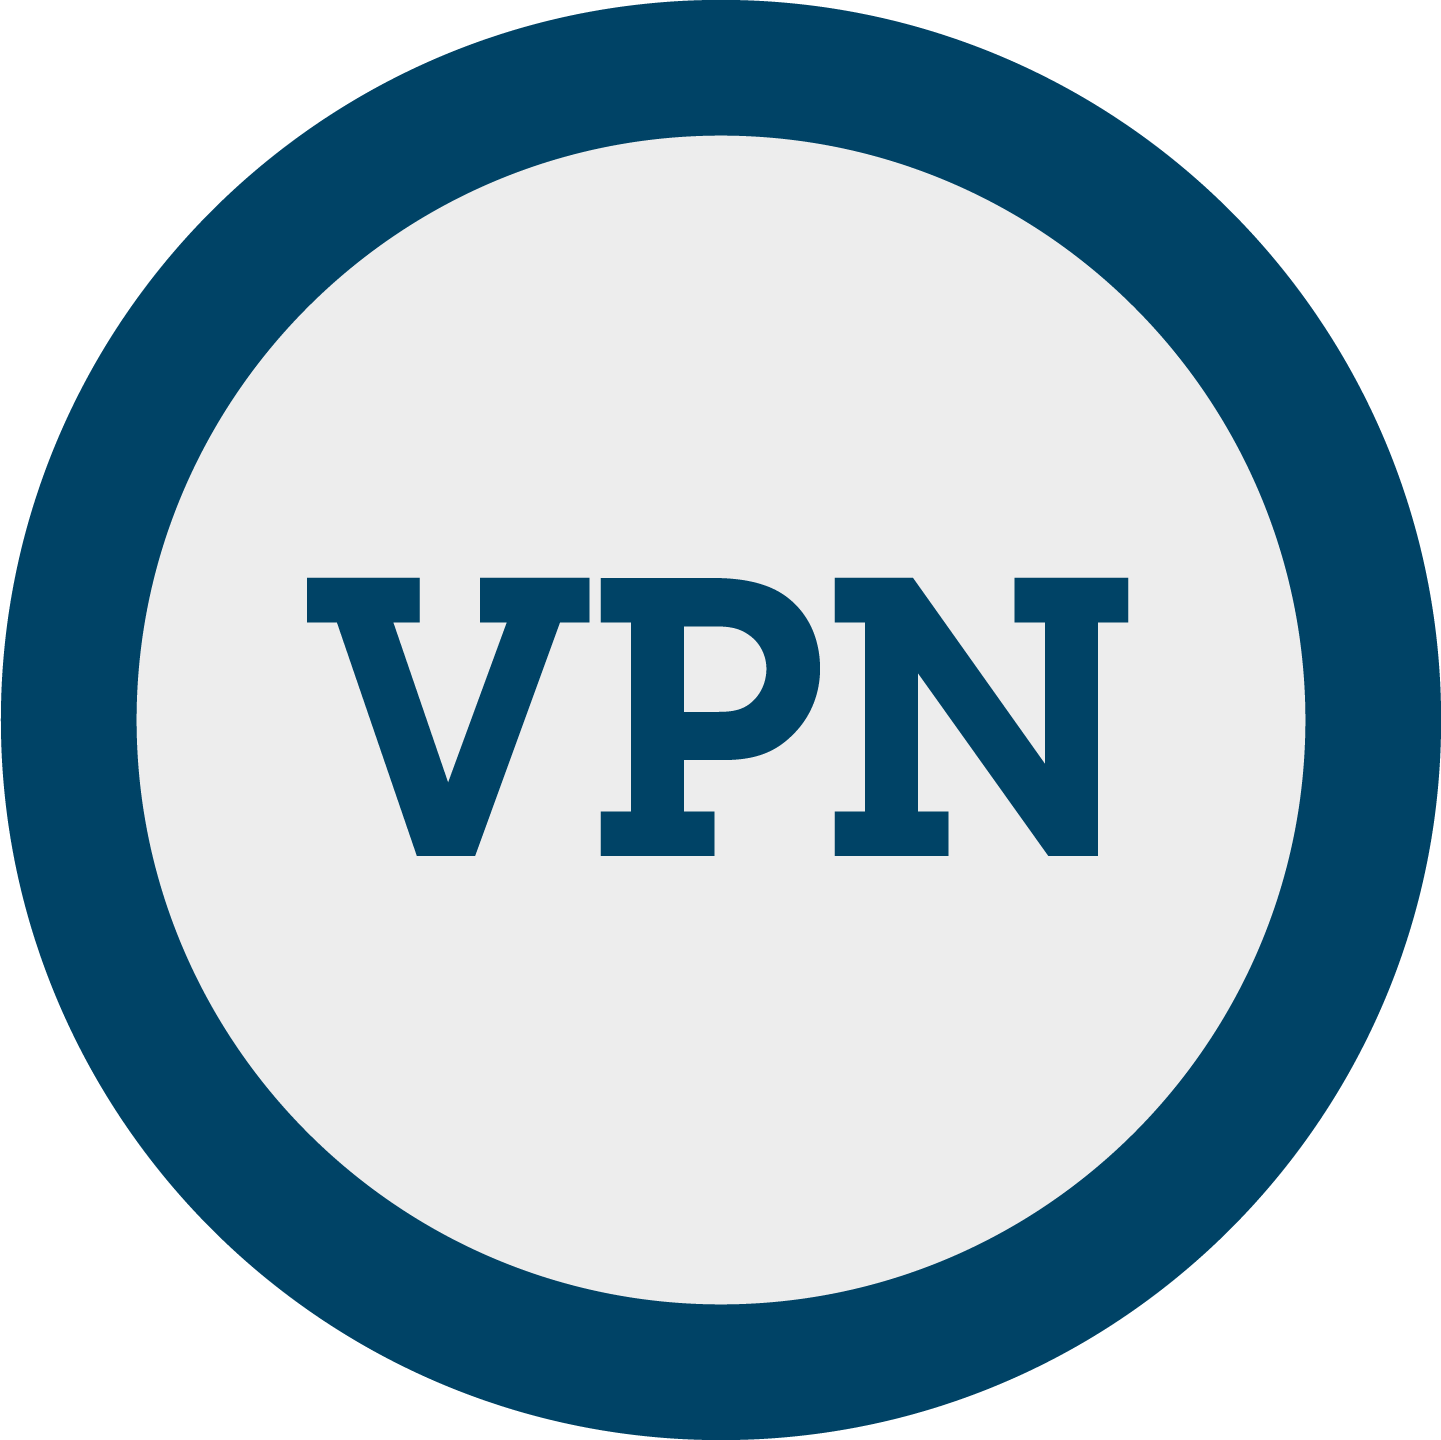 VPN Logo - Why and how to use a VPN on your iOS device or Mac